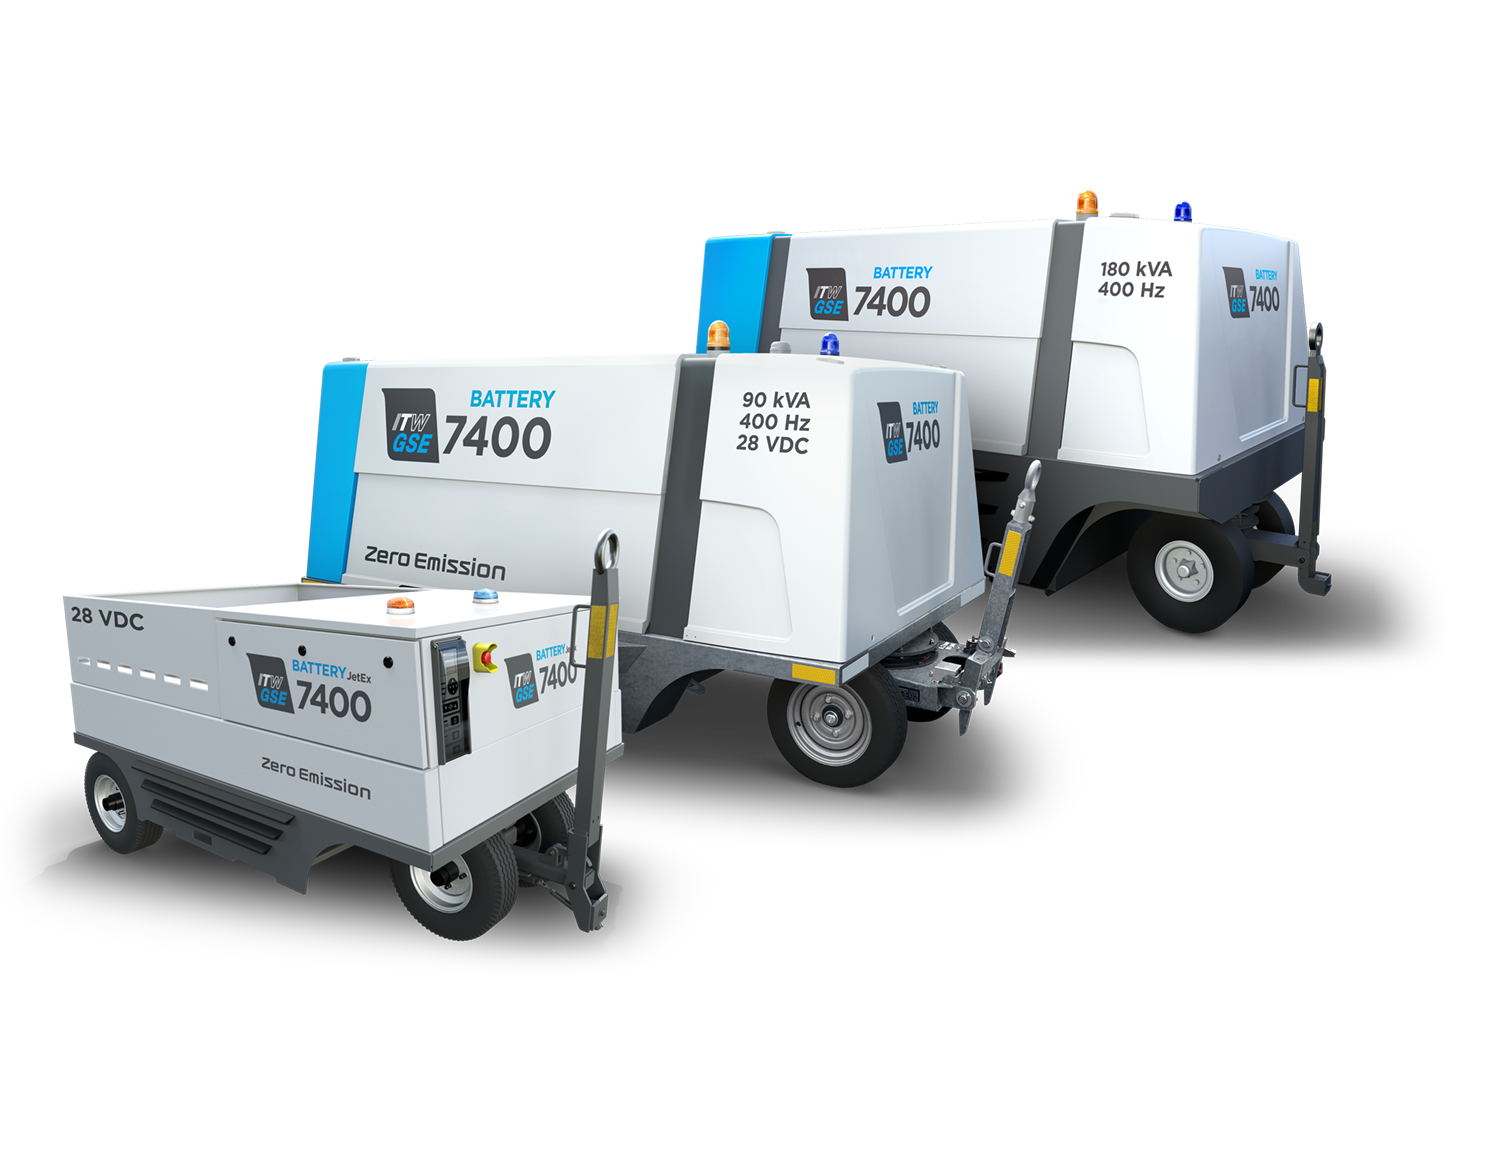 ITW GSE 7400 eGPU zero emission Ground power unit offered by Patlon in Canada